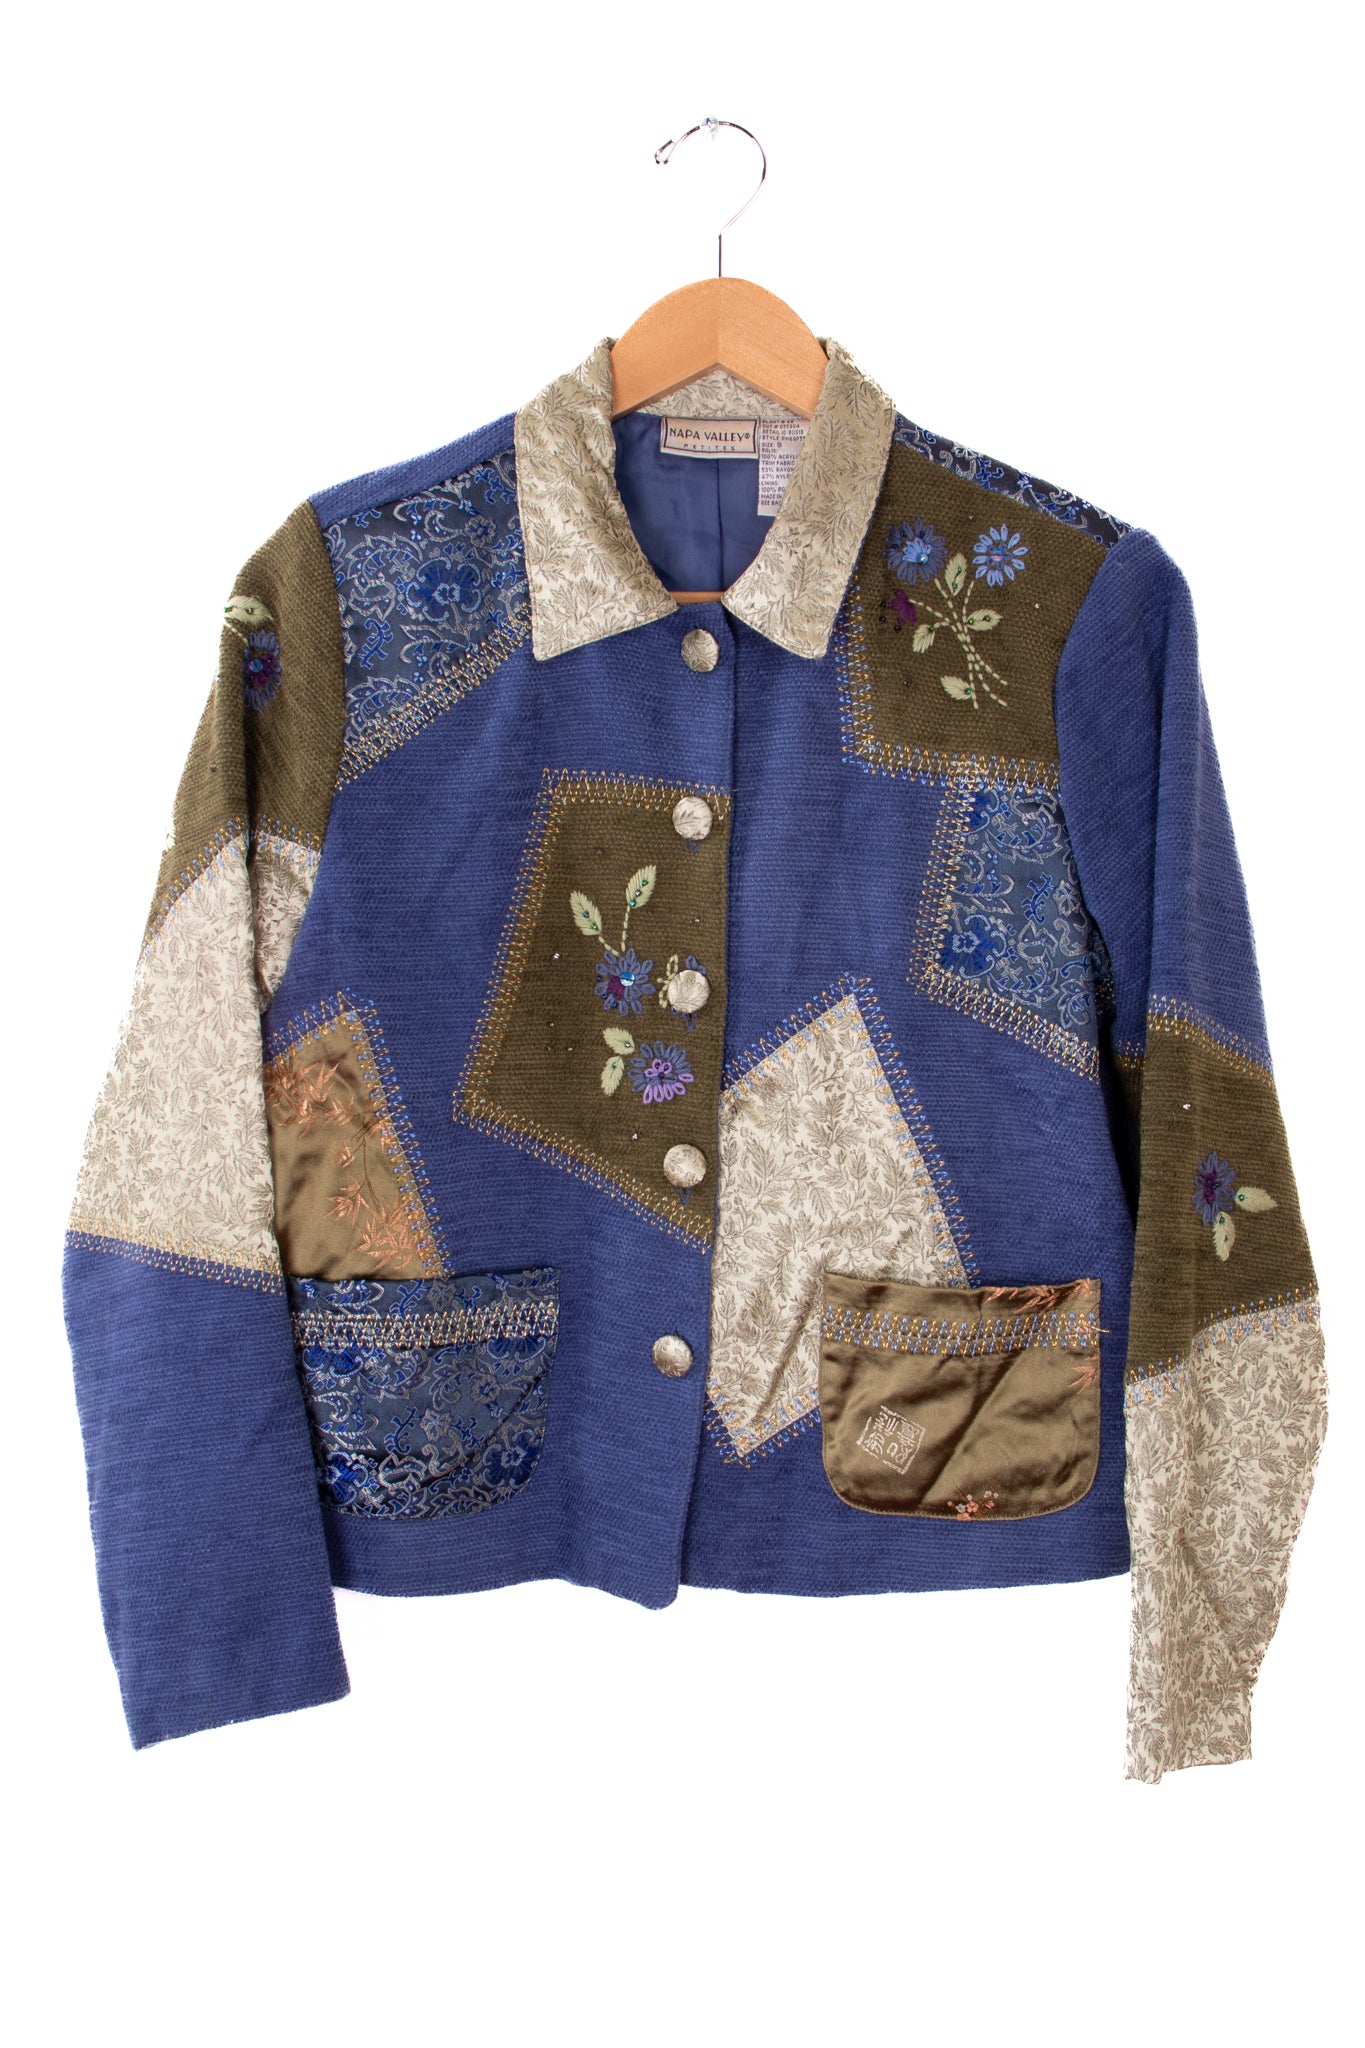 90s Napa Valley Green and Blue Flower Sequined Jacket